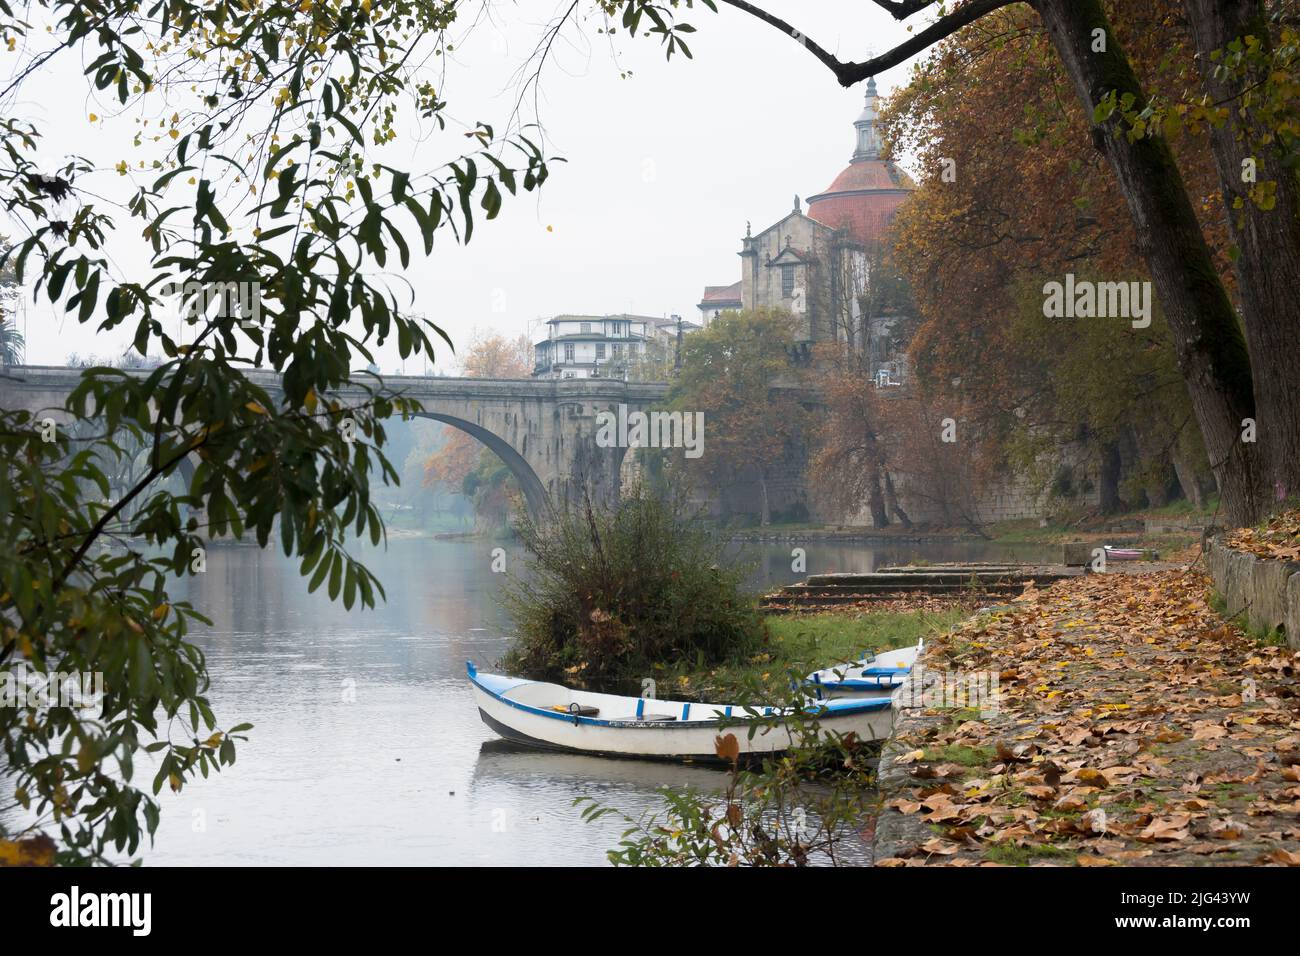 White rowing boat on the Tamega river near the historic bridge and Monastery and church of São Gonçalo. Amarante, Portugal. Stock Photo